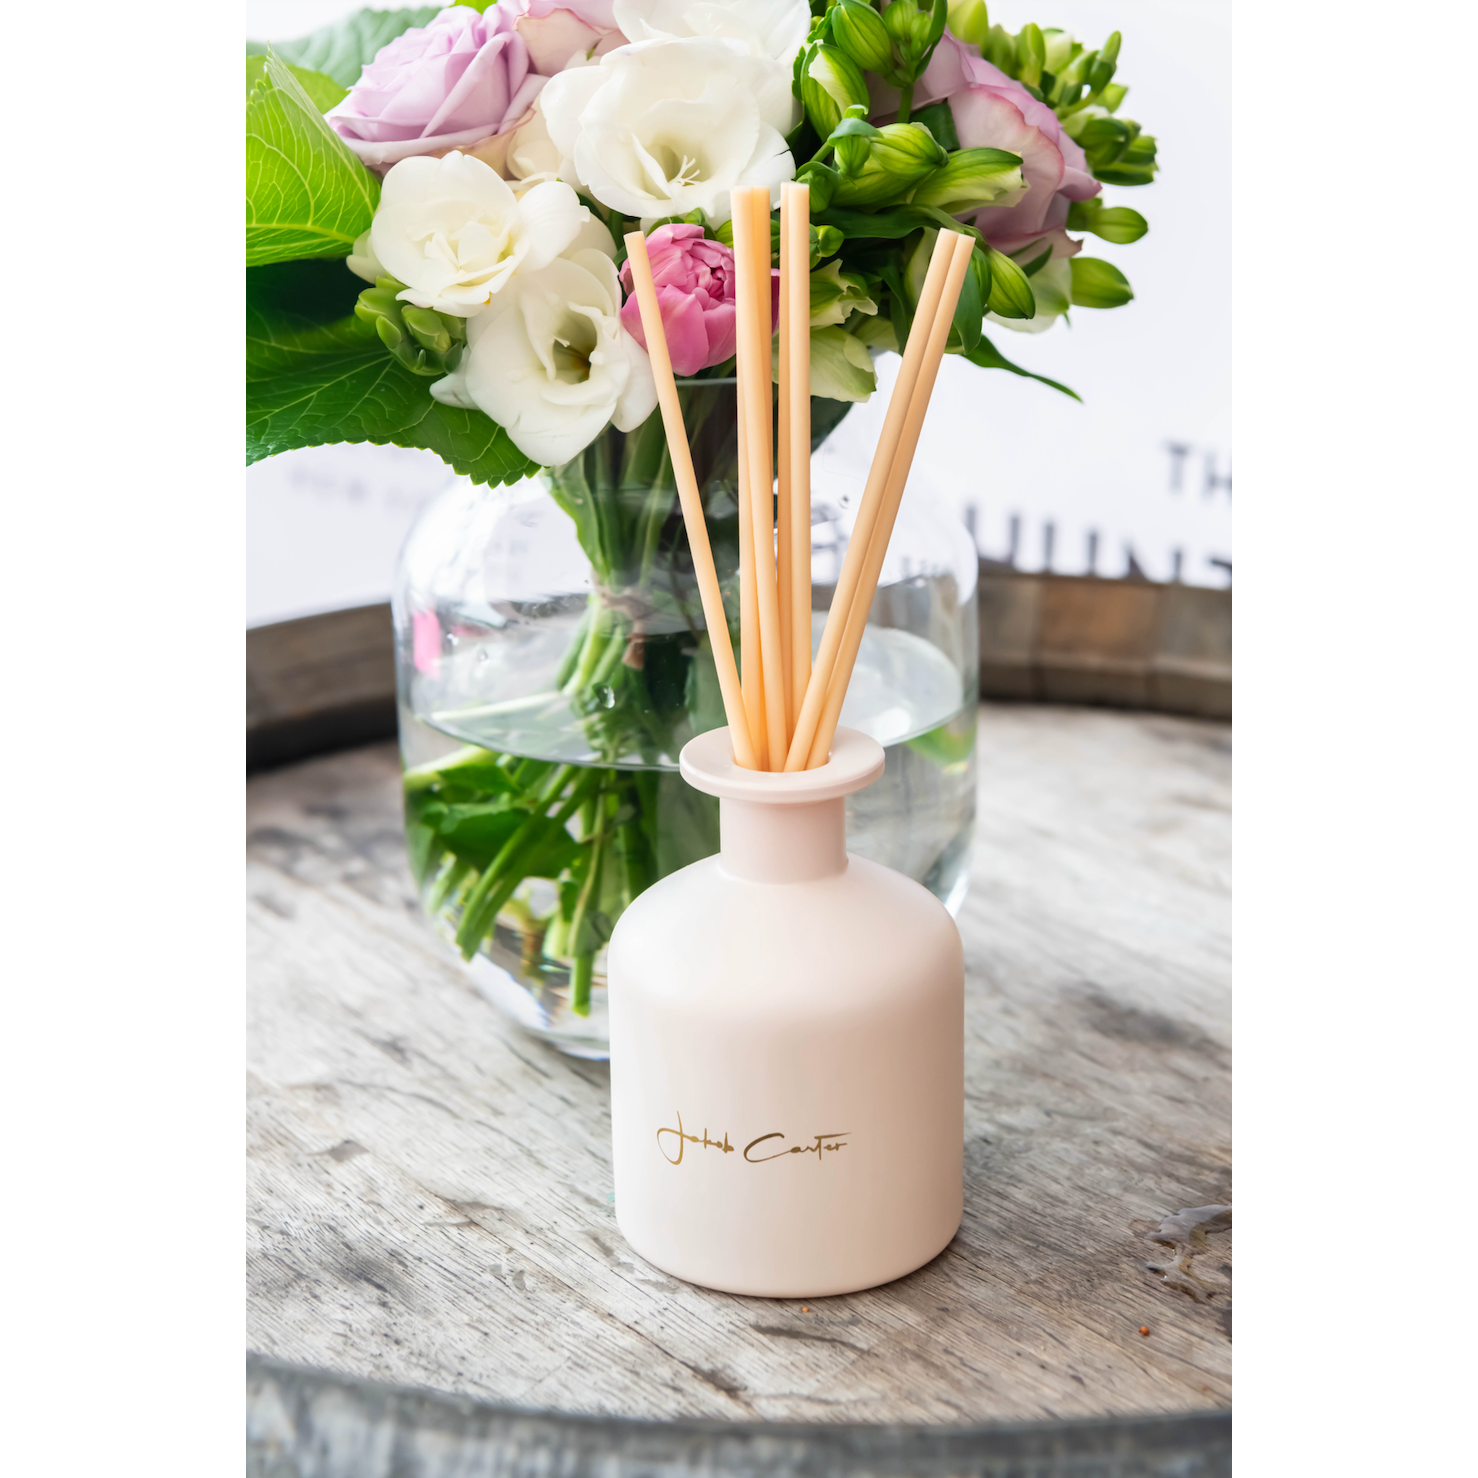 COCONUT, LIME & LAVENDER TRIPLE SCENTED REED DIFFUSER